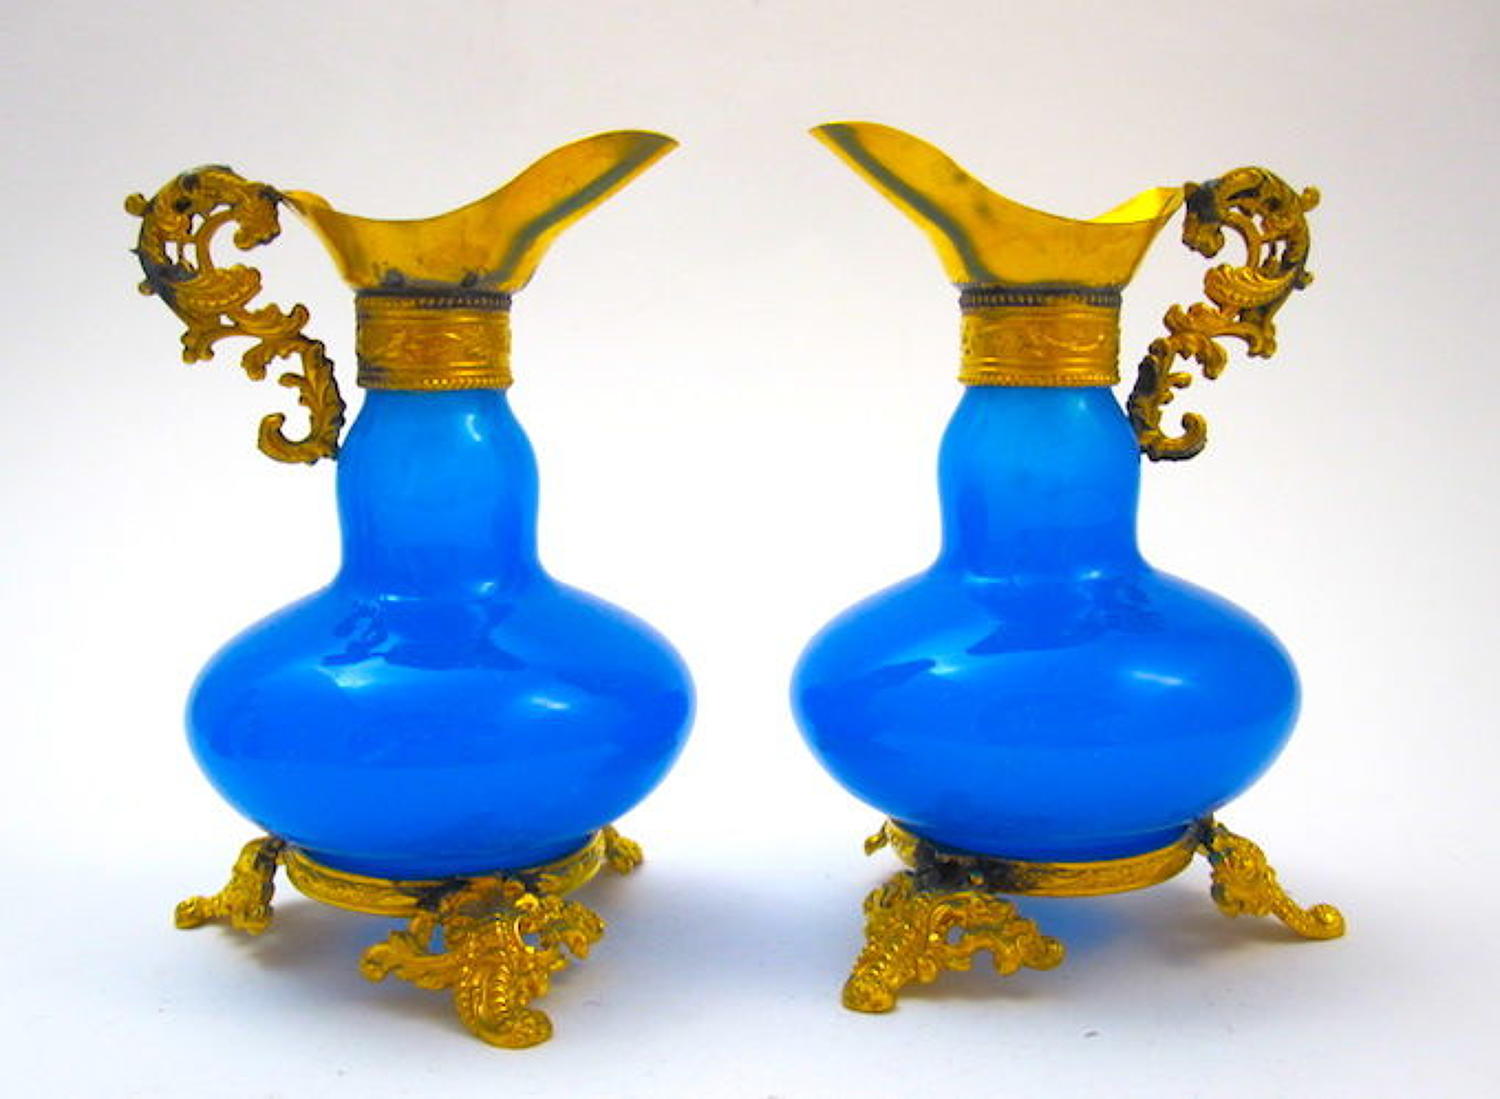 A Pair of Antique French Miniature Blue Opaline Glass Vases